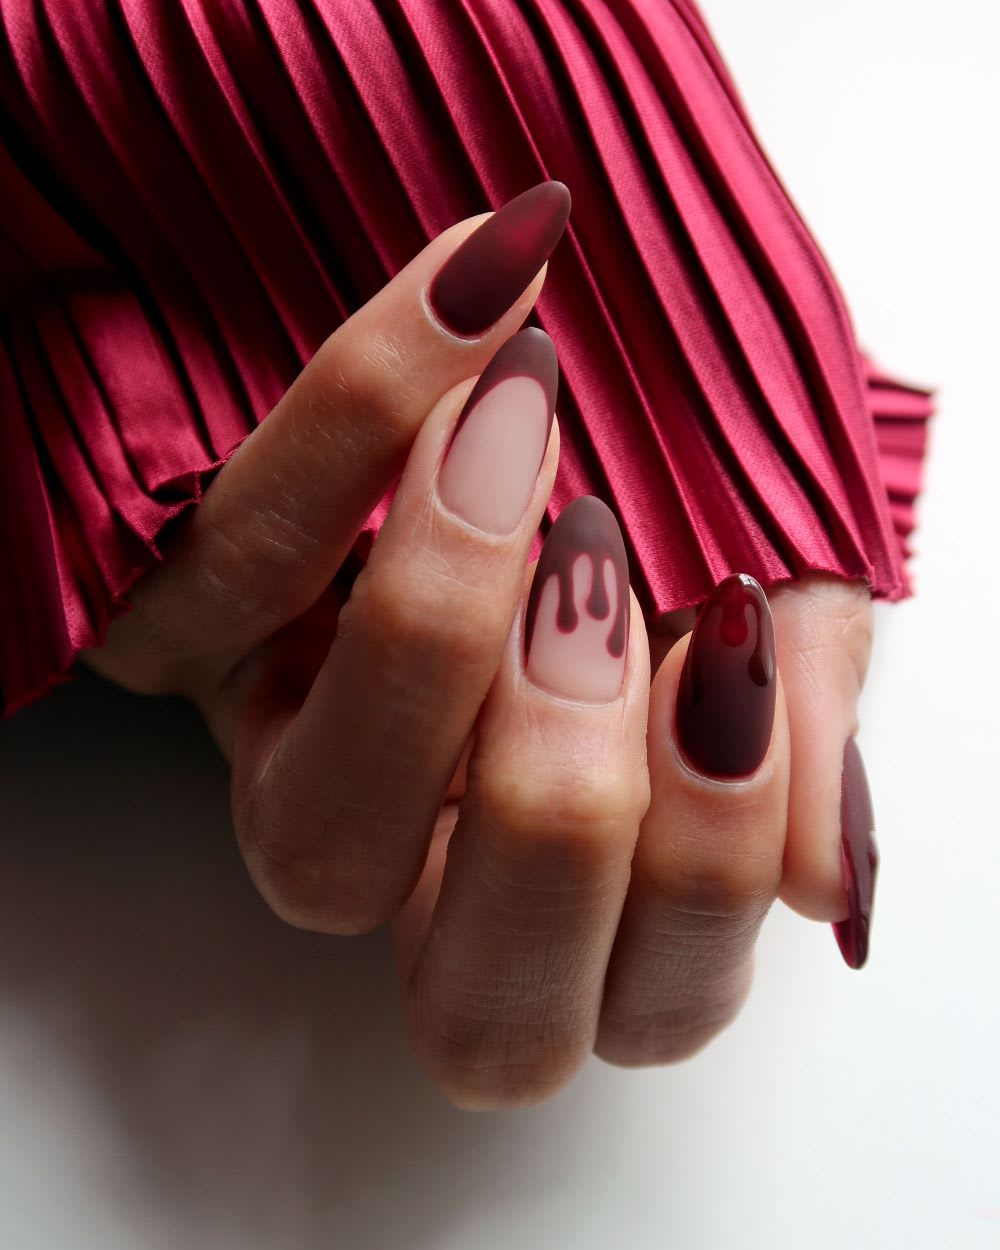 Dark red and gold nail art designs to spice up your beauty inspiration